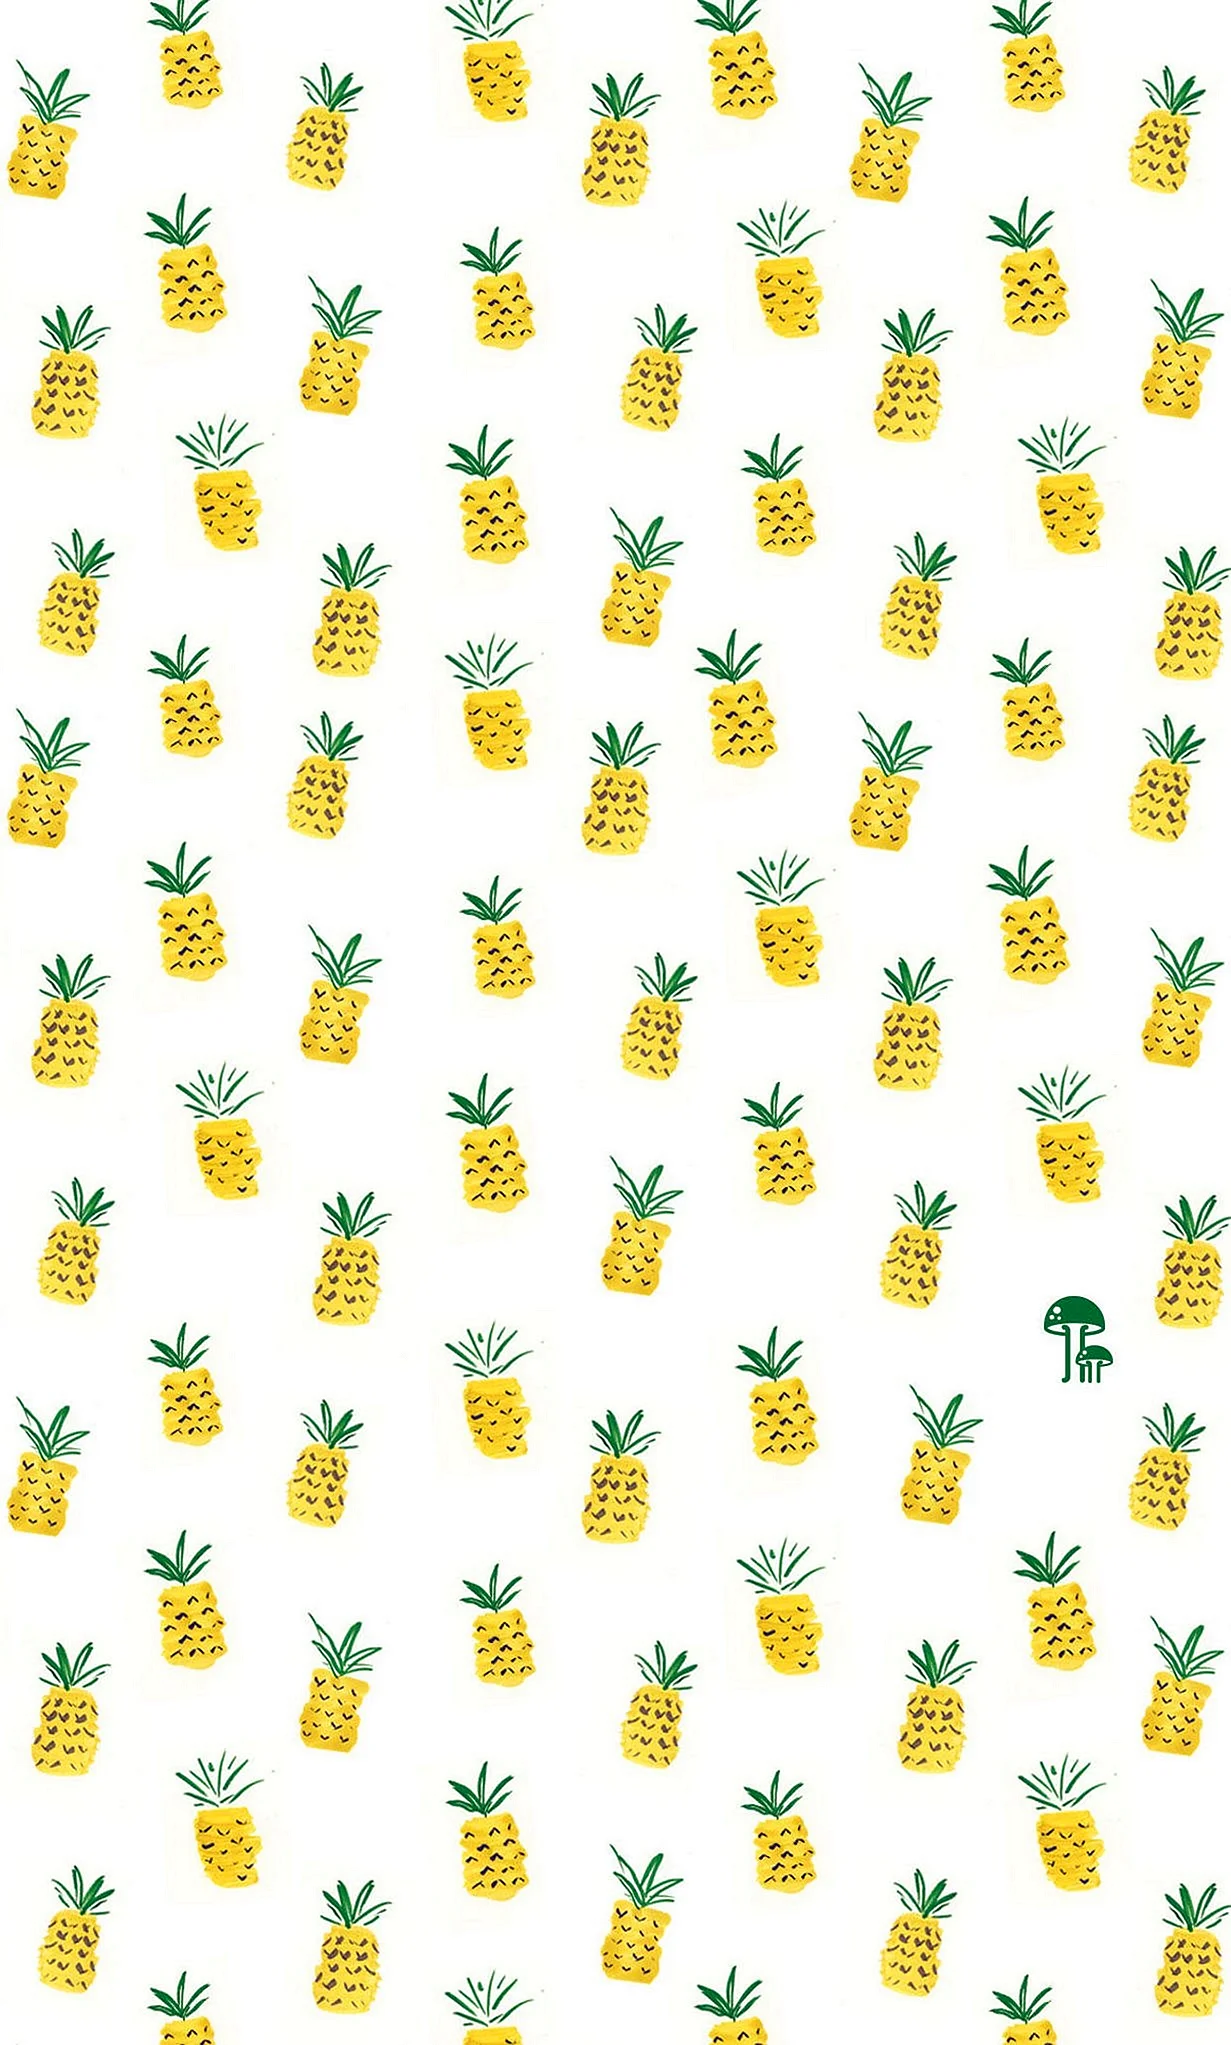 Pineapple Pattern Wallpaper For iPhone